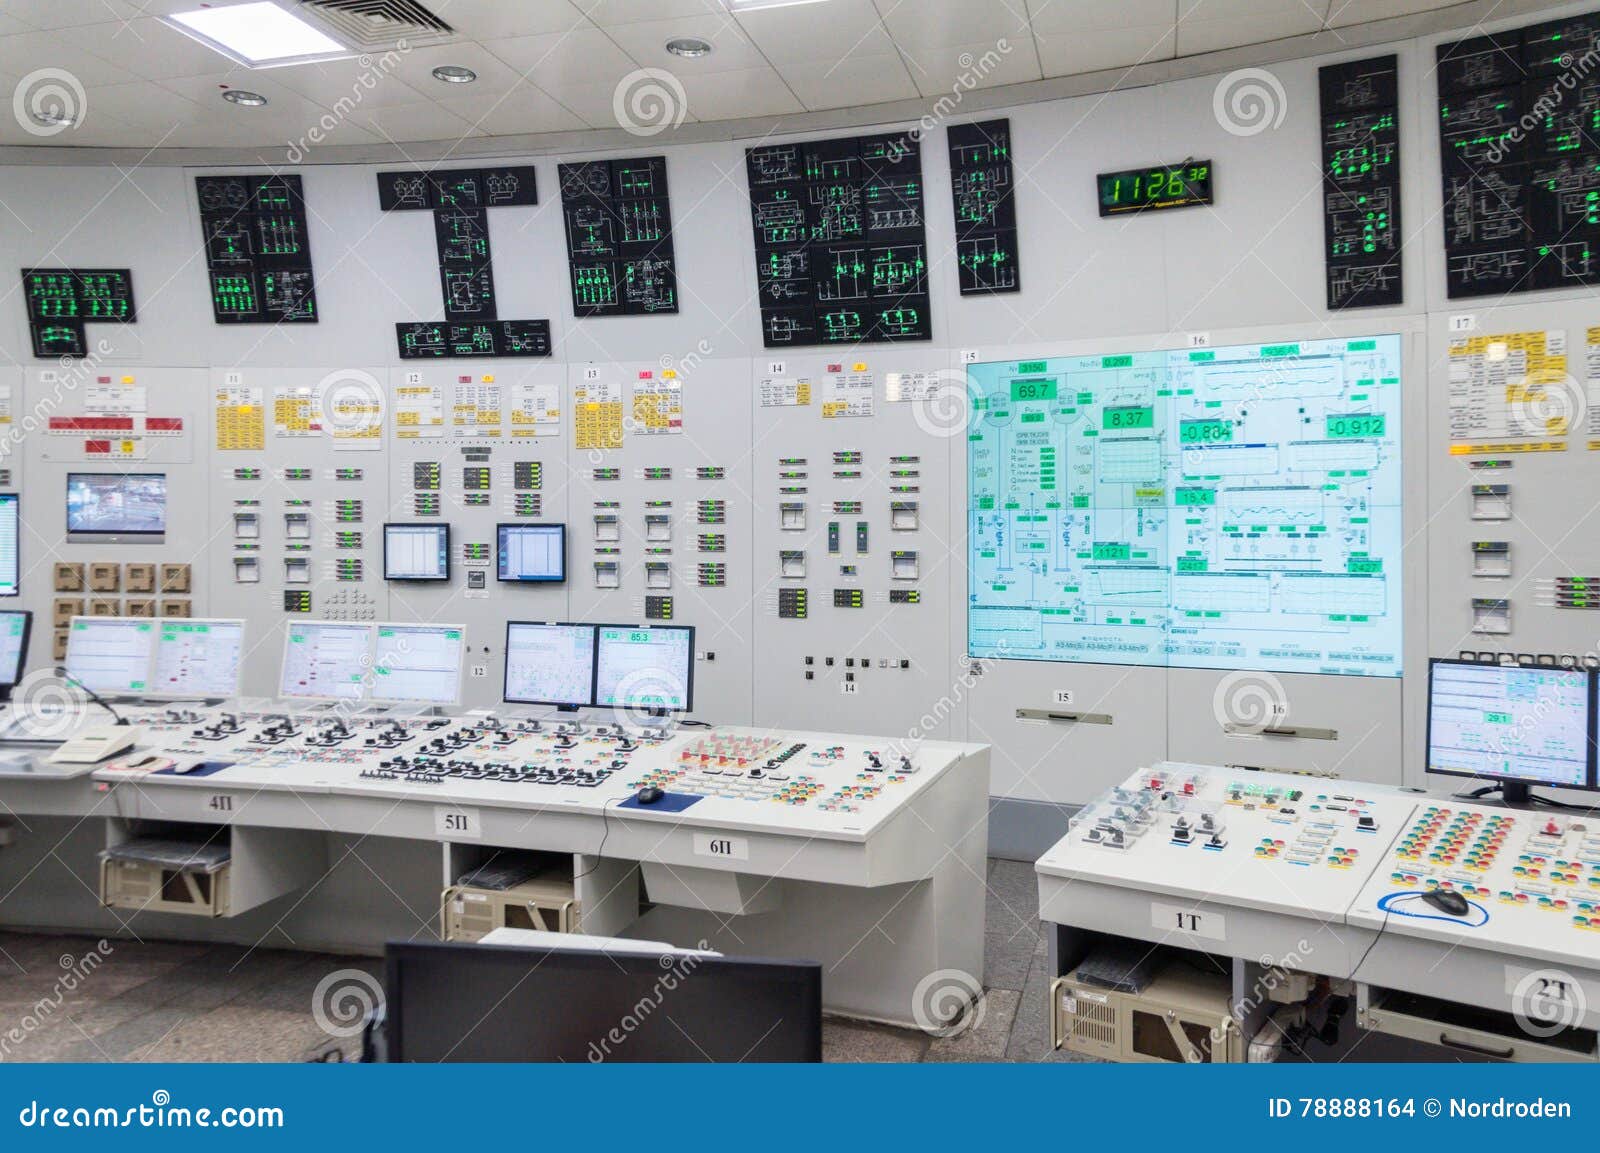 The Central Control Room Nuclear Power Plant. Stock Photo - Image of center, button: 78888164